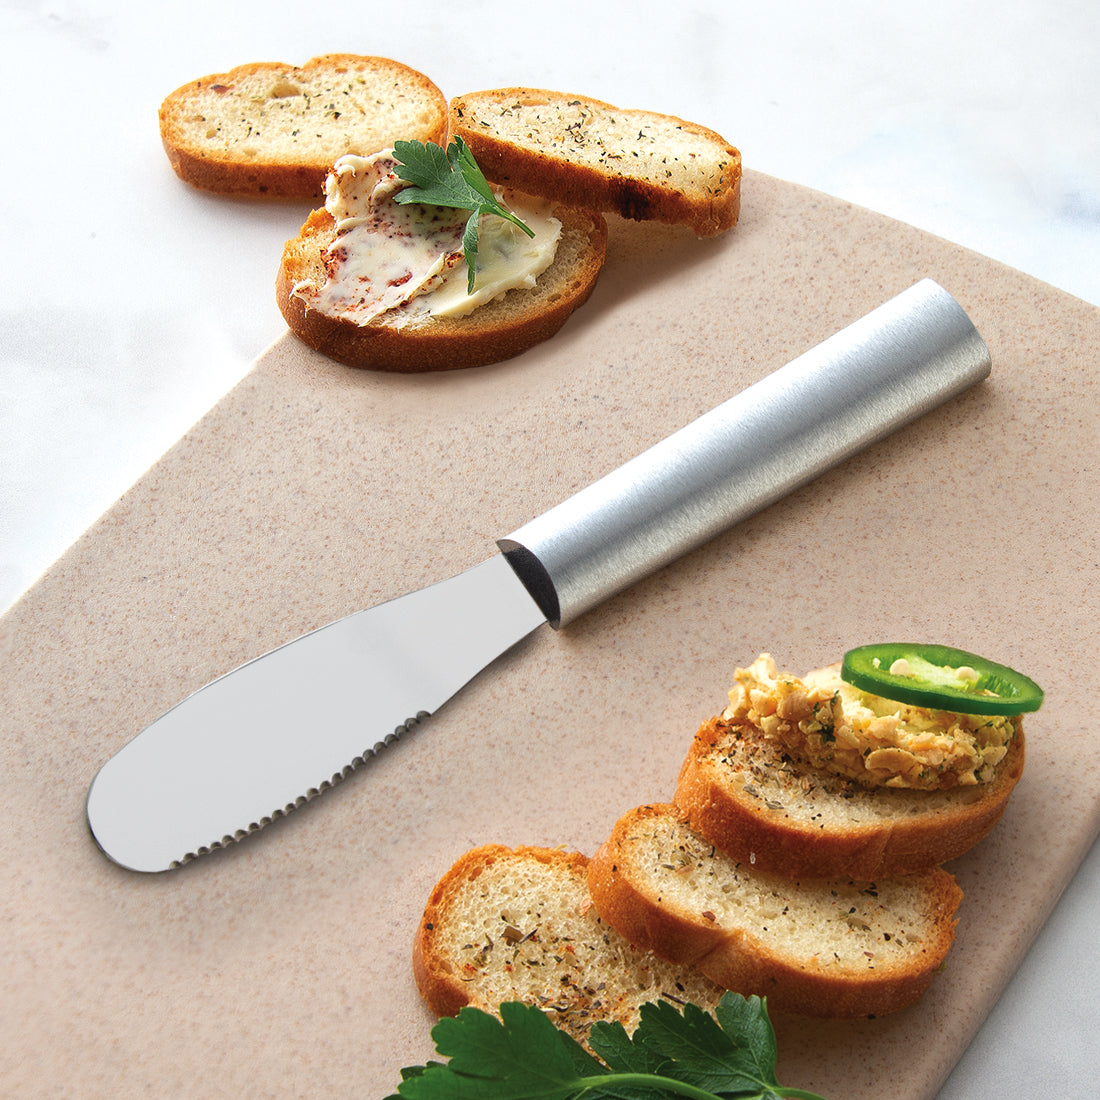 A Party Spreader on a cutting board with slices of bread